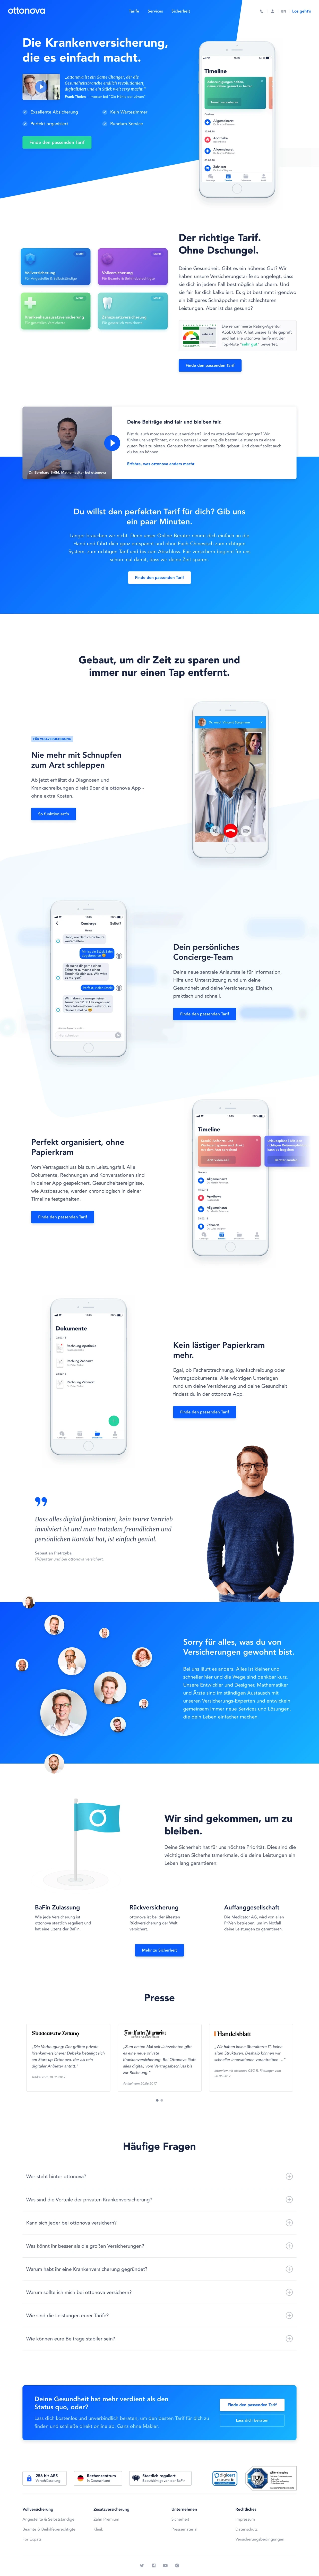 ottonova Landing Page Example: From finding the right insurance and signing up, to scheduling appointments and figuring out the reimbursement process – we've made it super simple.